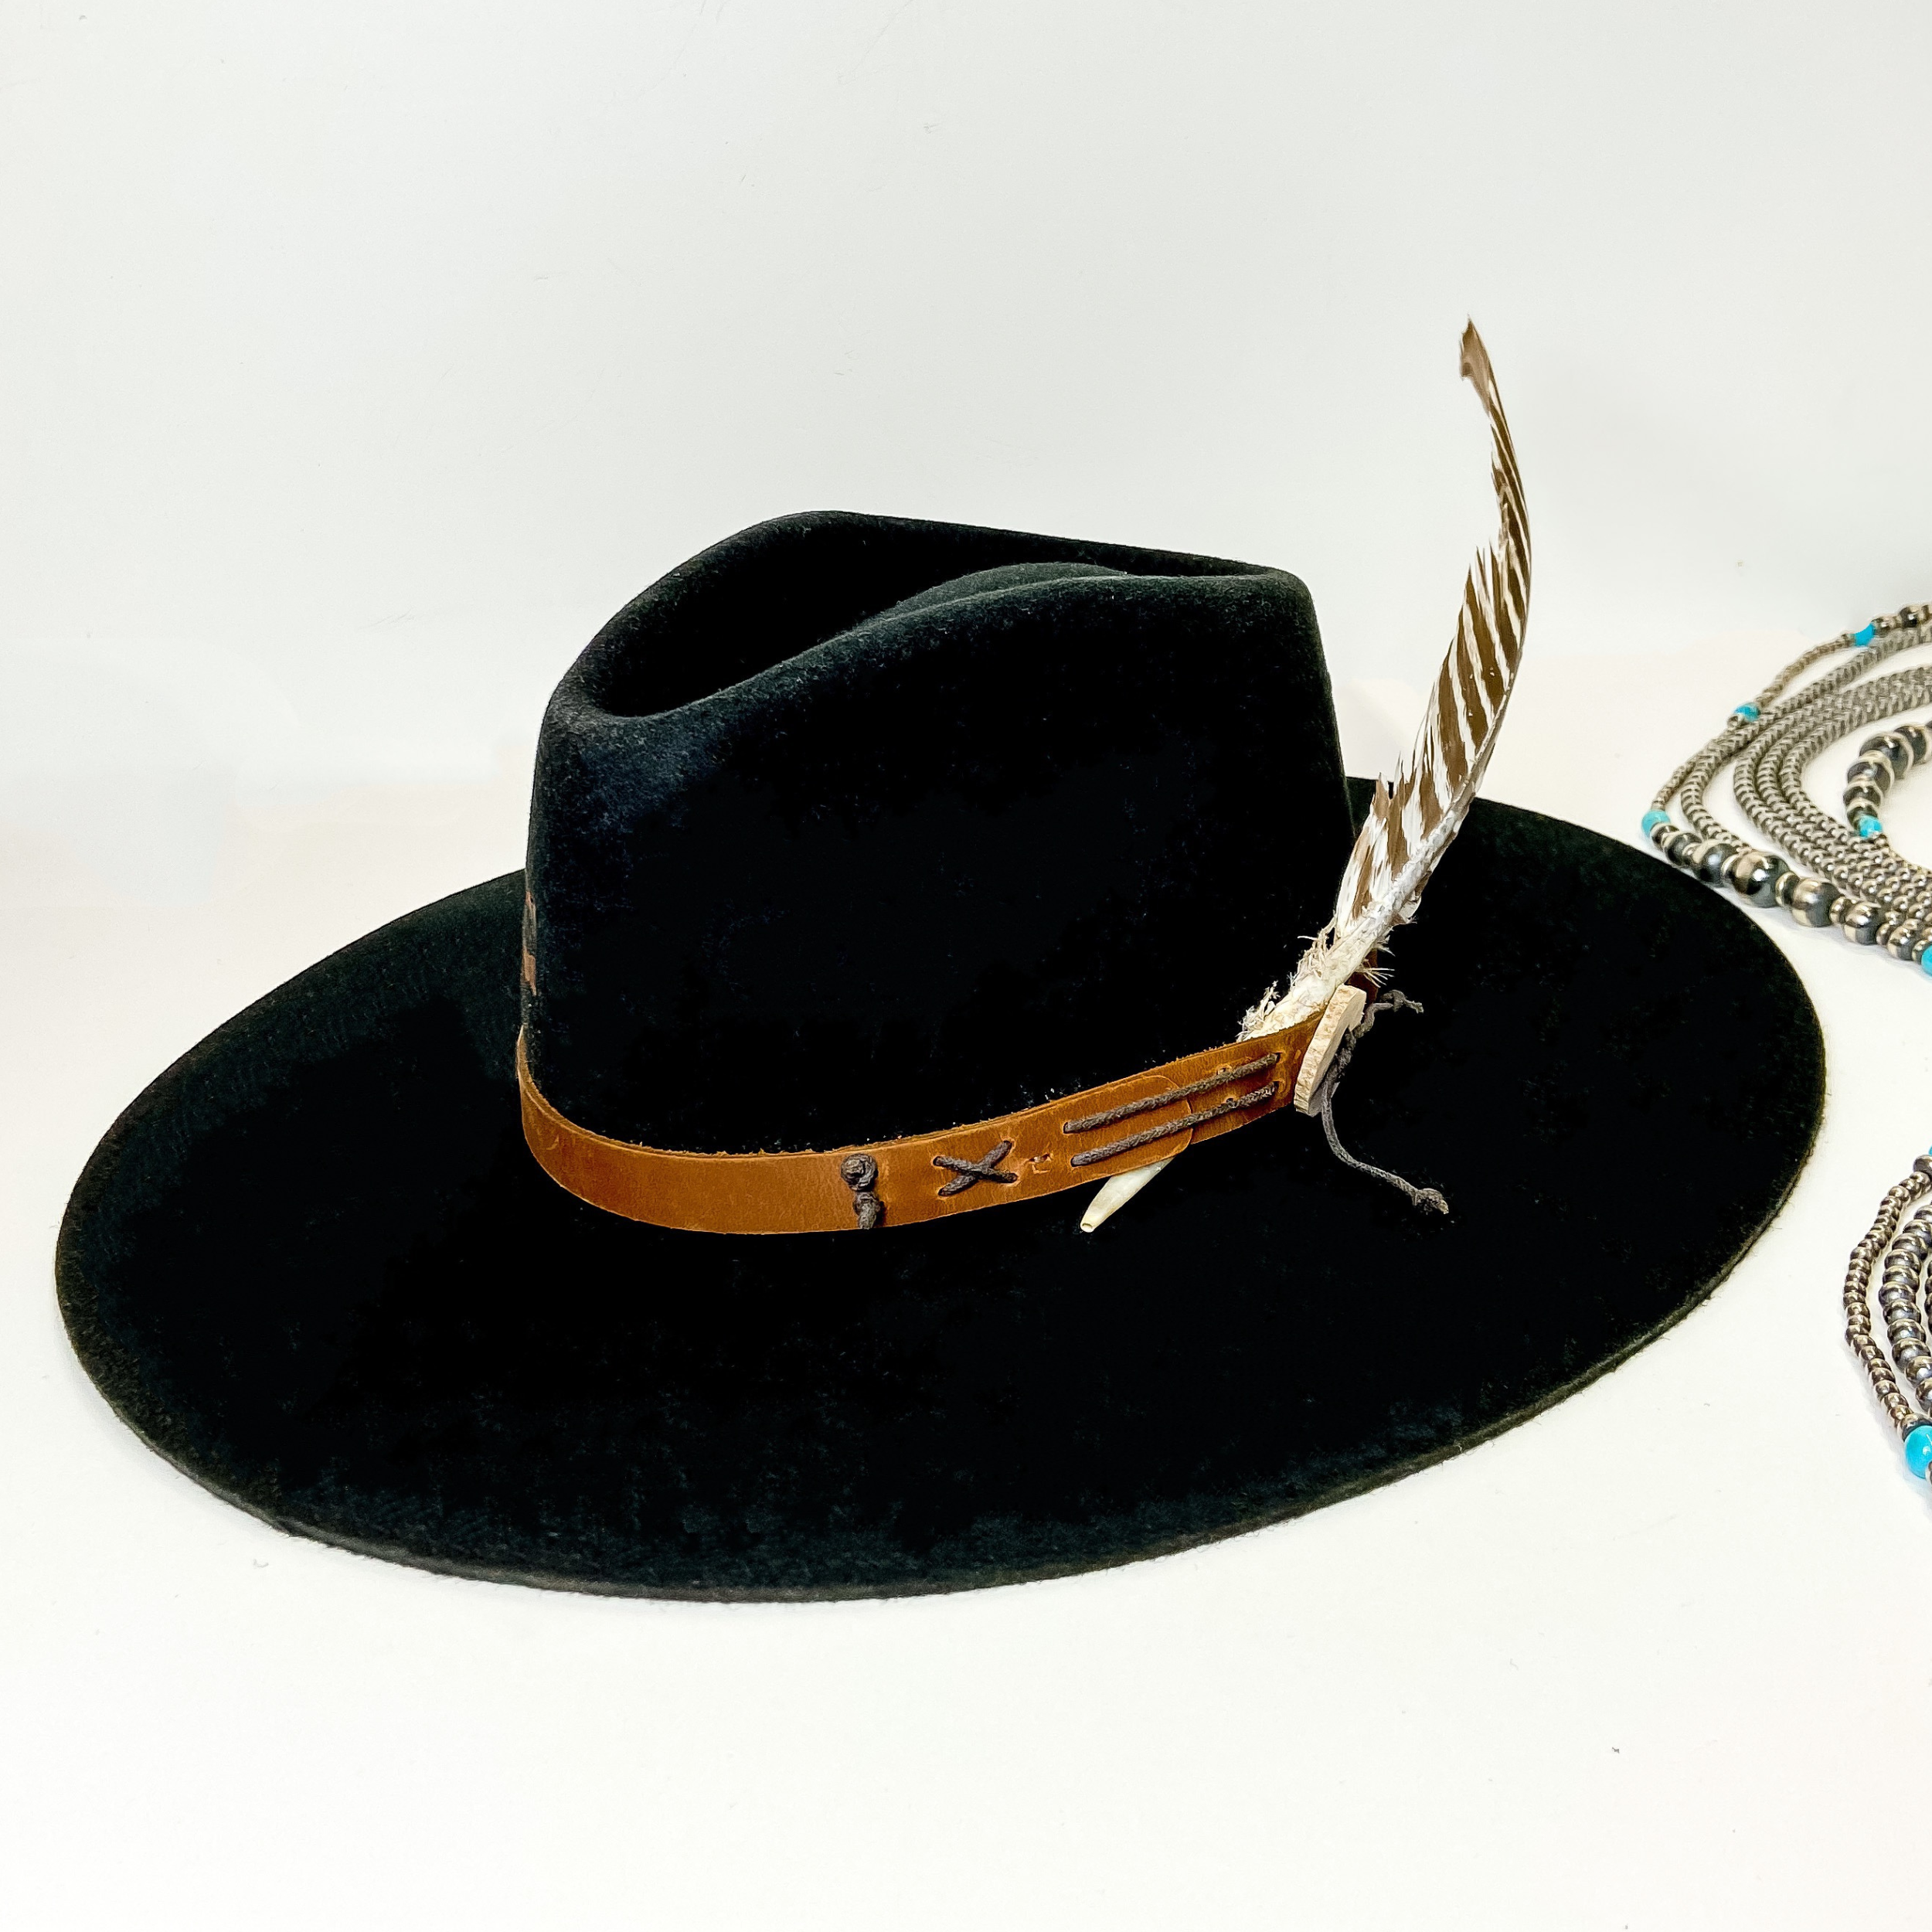 A black felt hat with a leather band and threaded detailing with a feather. This hat is pictured on a white background with genuine Navajo pearls.